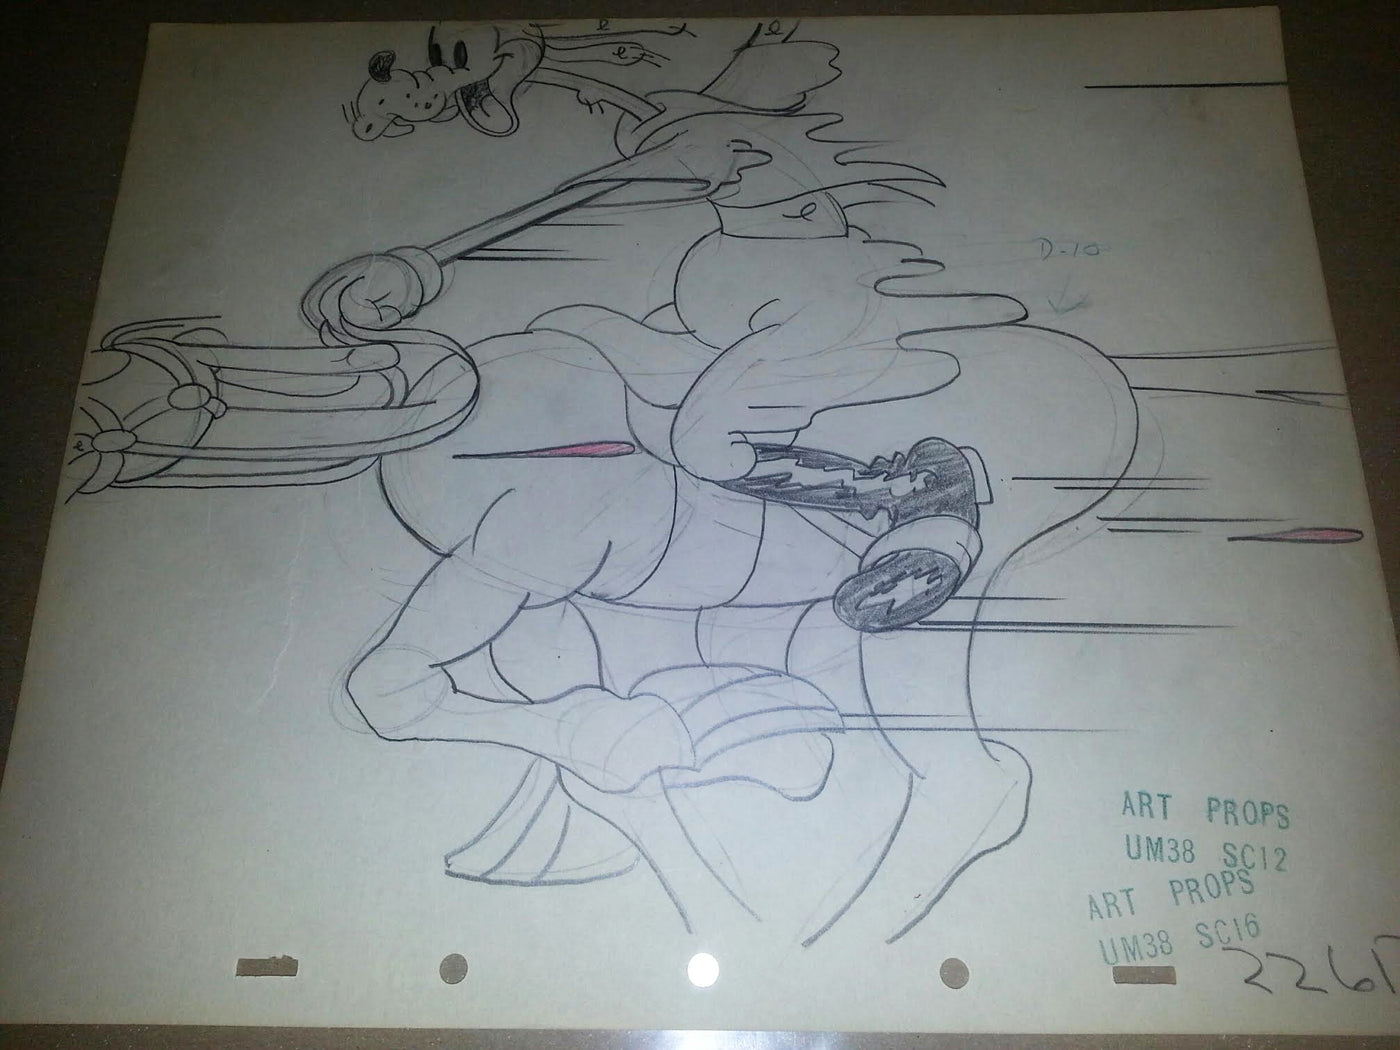 Original Walt Disney Production Drawing from Mickey's Polo Team (1936)